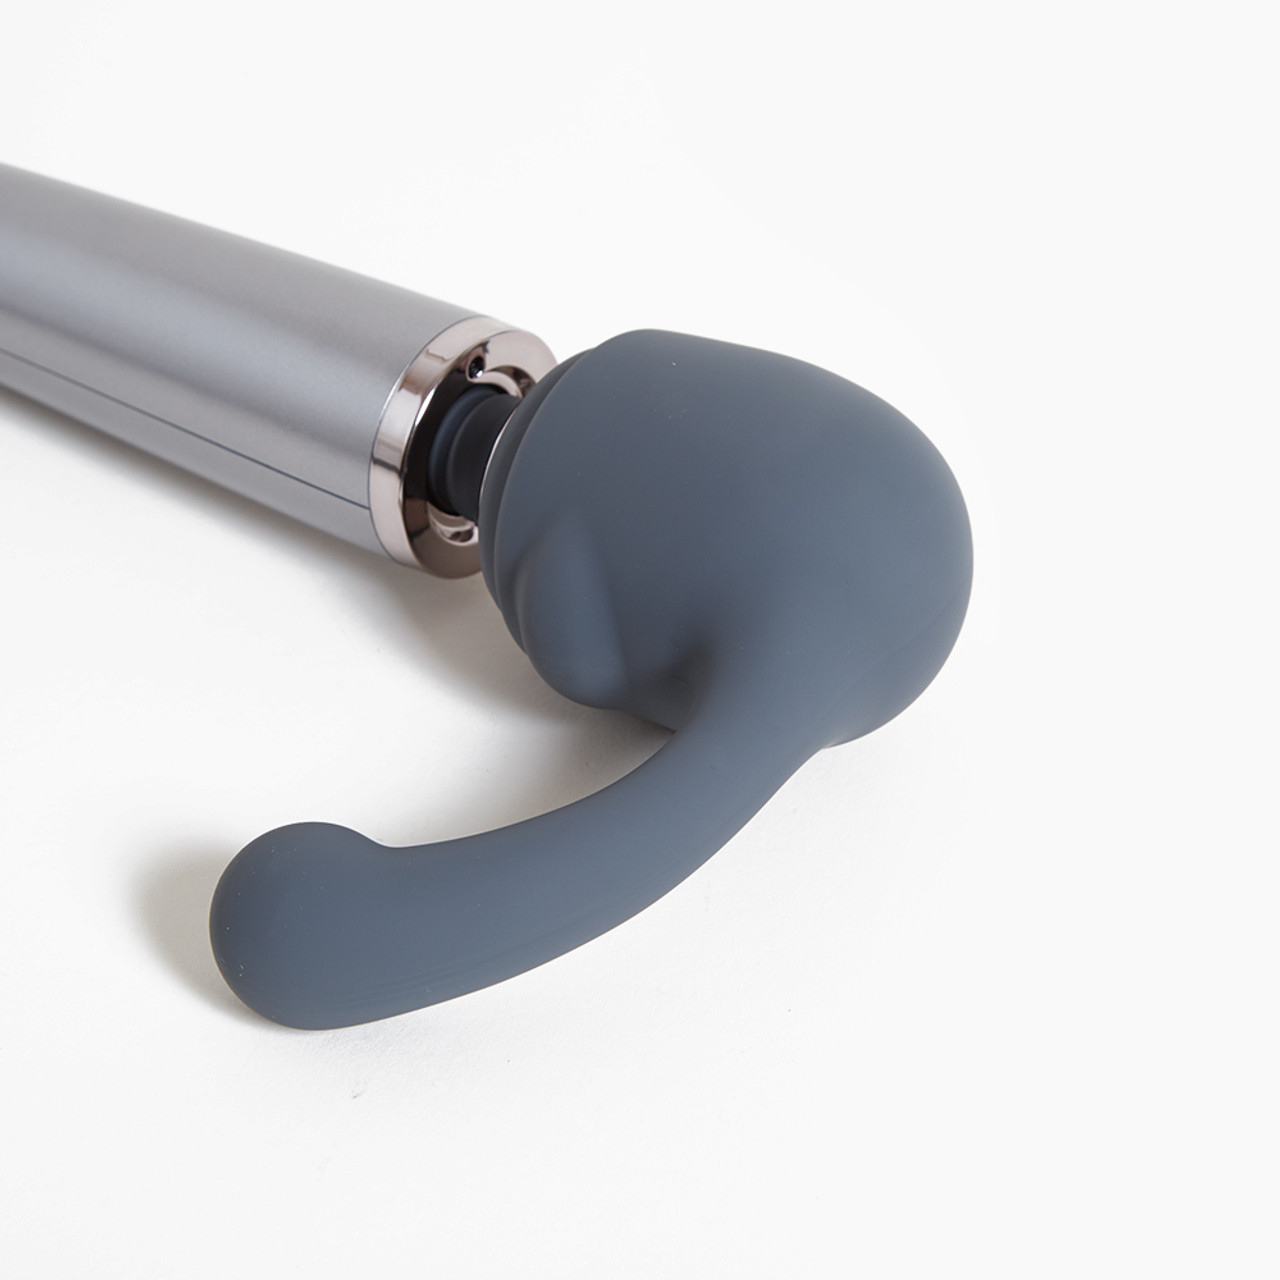 Le Wand Curve', a grey silicone wand with a curved shape for G-spot or P-spot